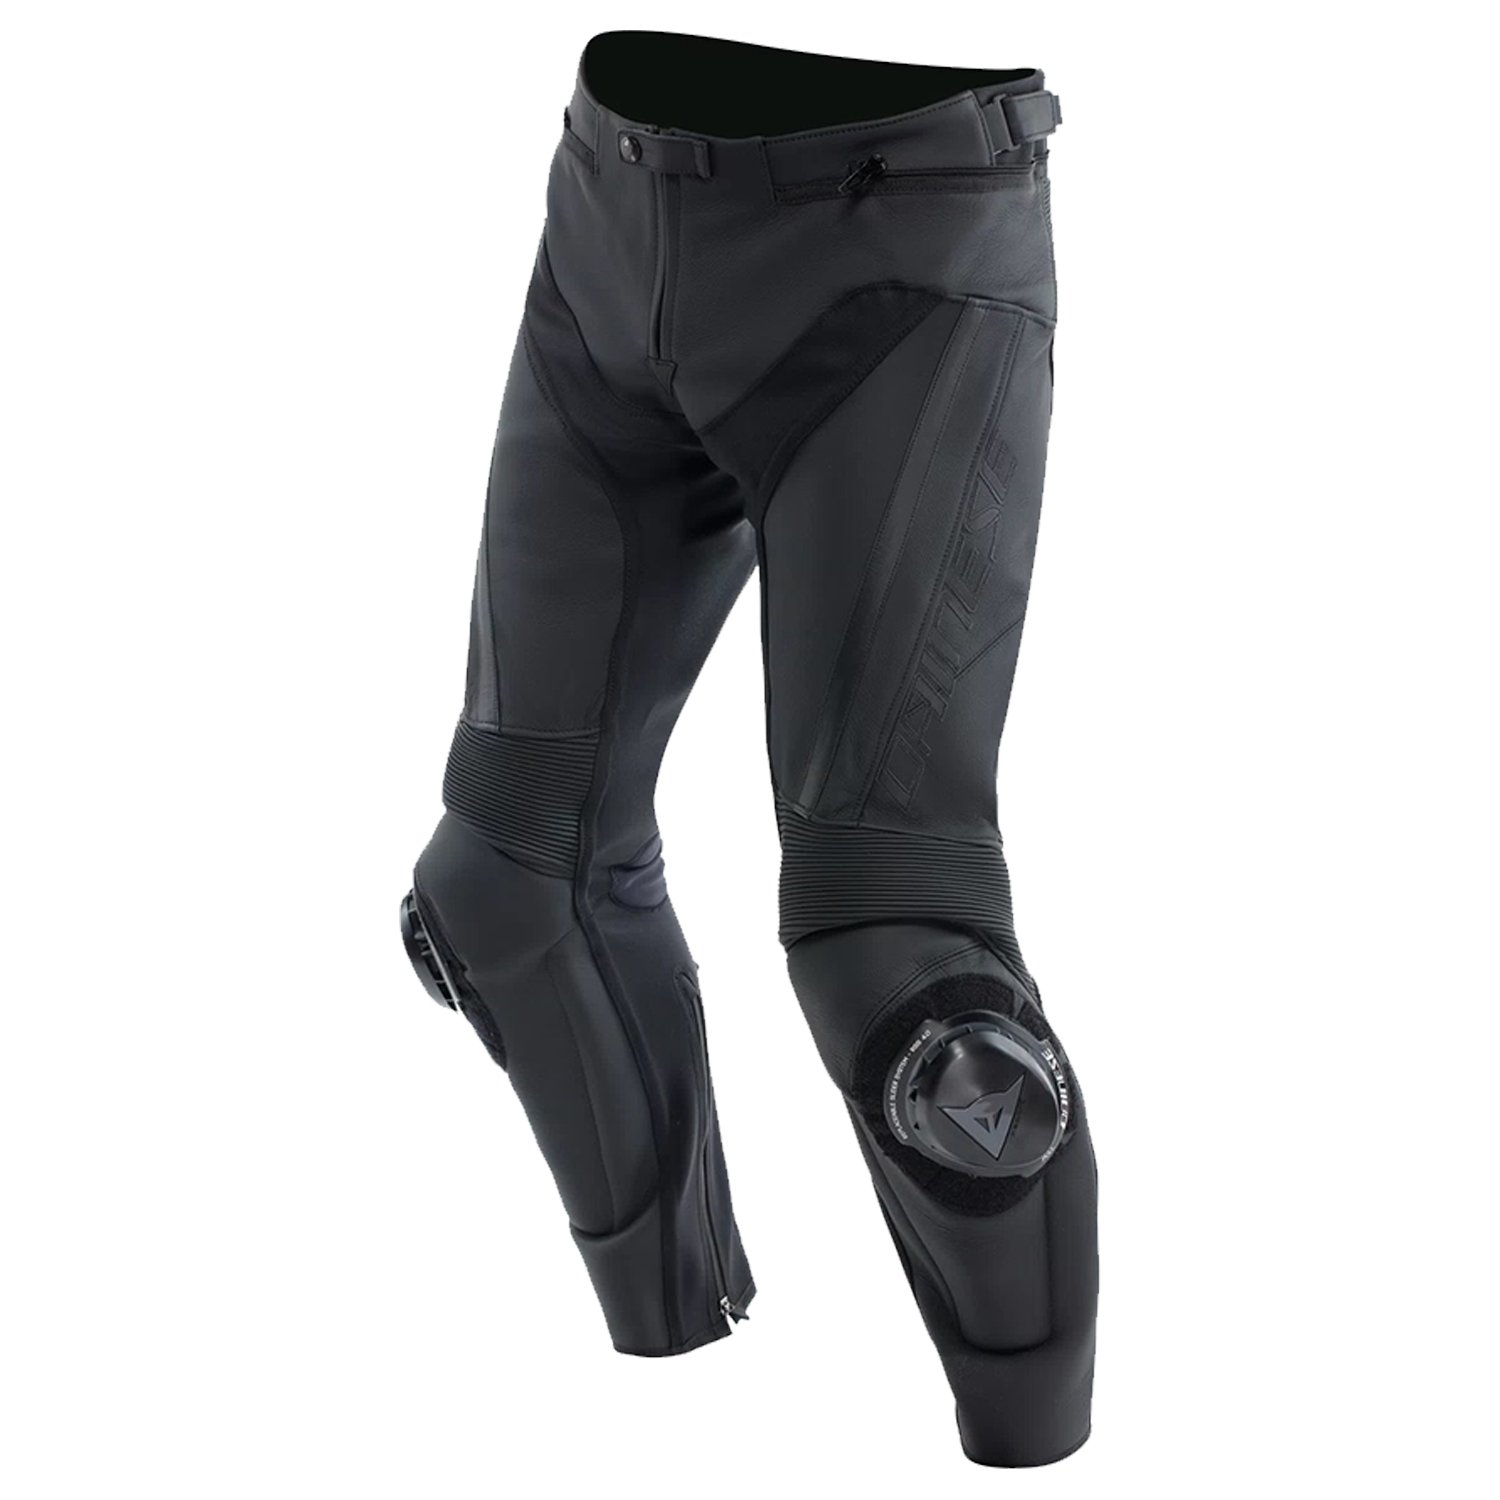 Image of Dainese Delta 4 Leather Pants Black Size 48 ID 8051019640222